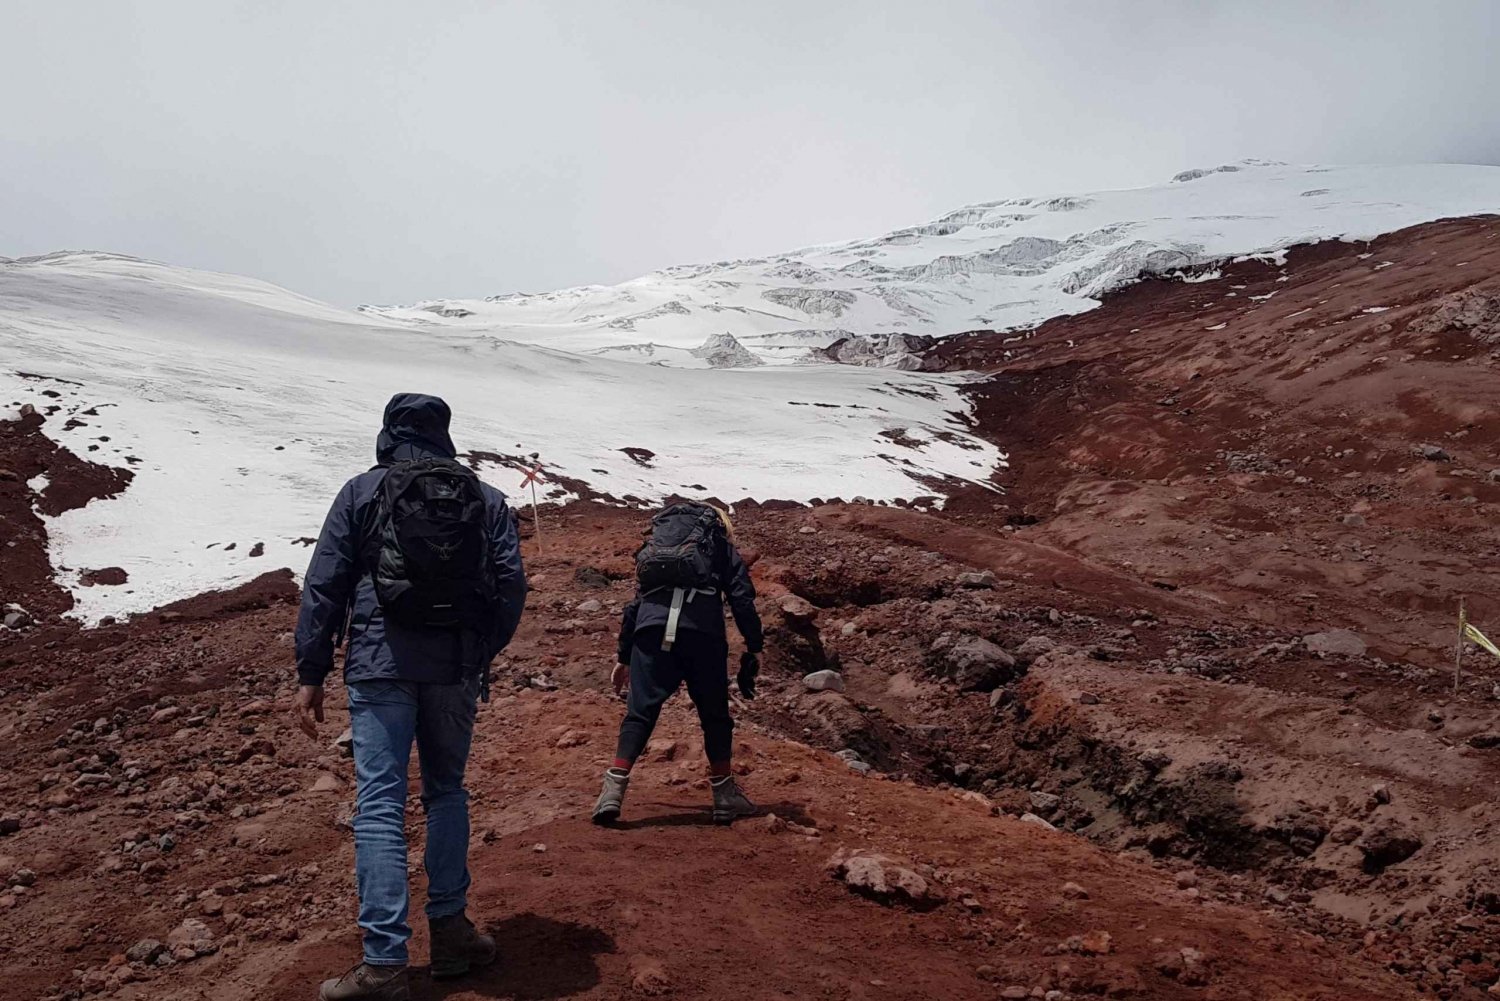 Cotopaxi Tour: Entrances and Lunch included